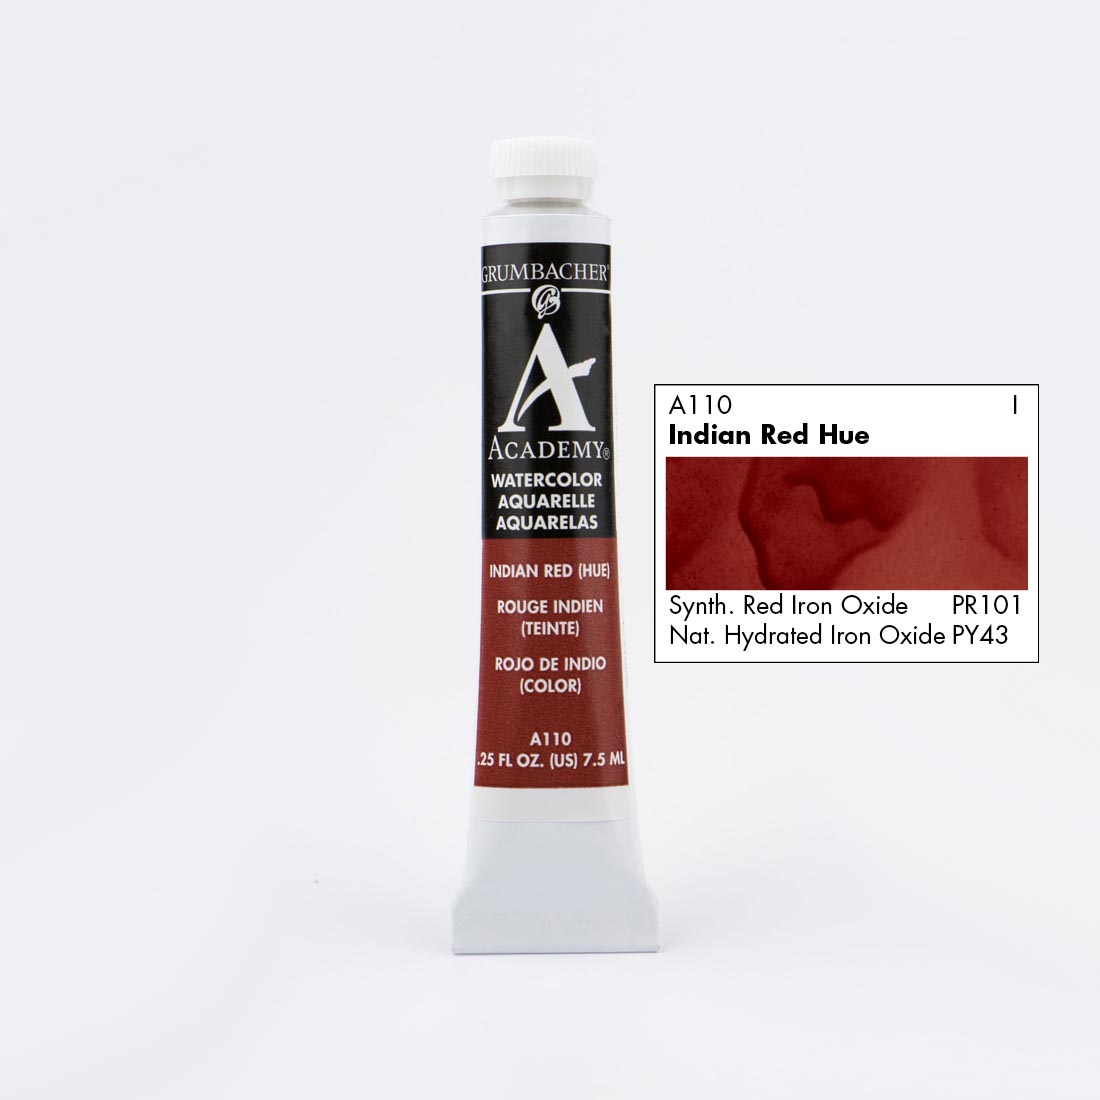 Tube of Grumbacher Academy Watercolor beside Indian Red Hue color swatch